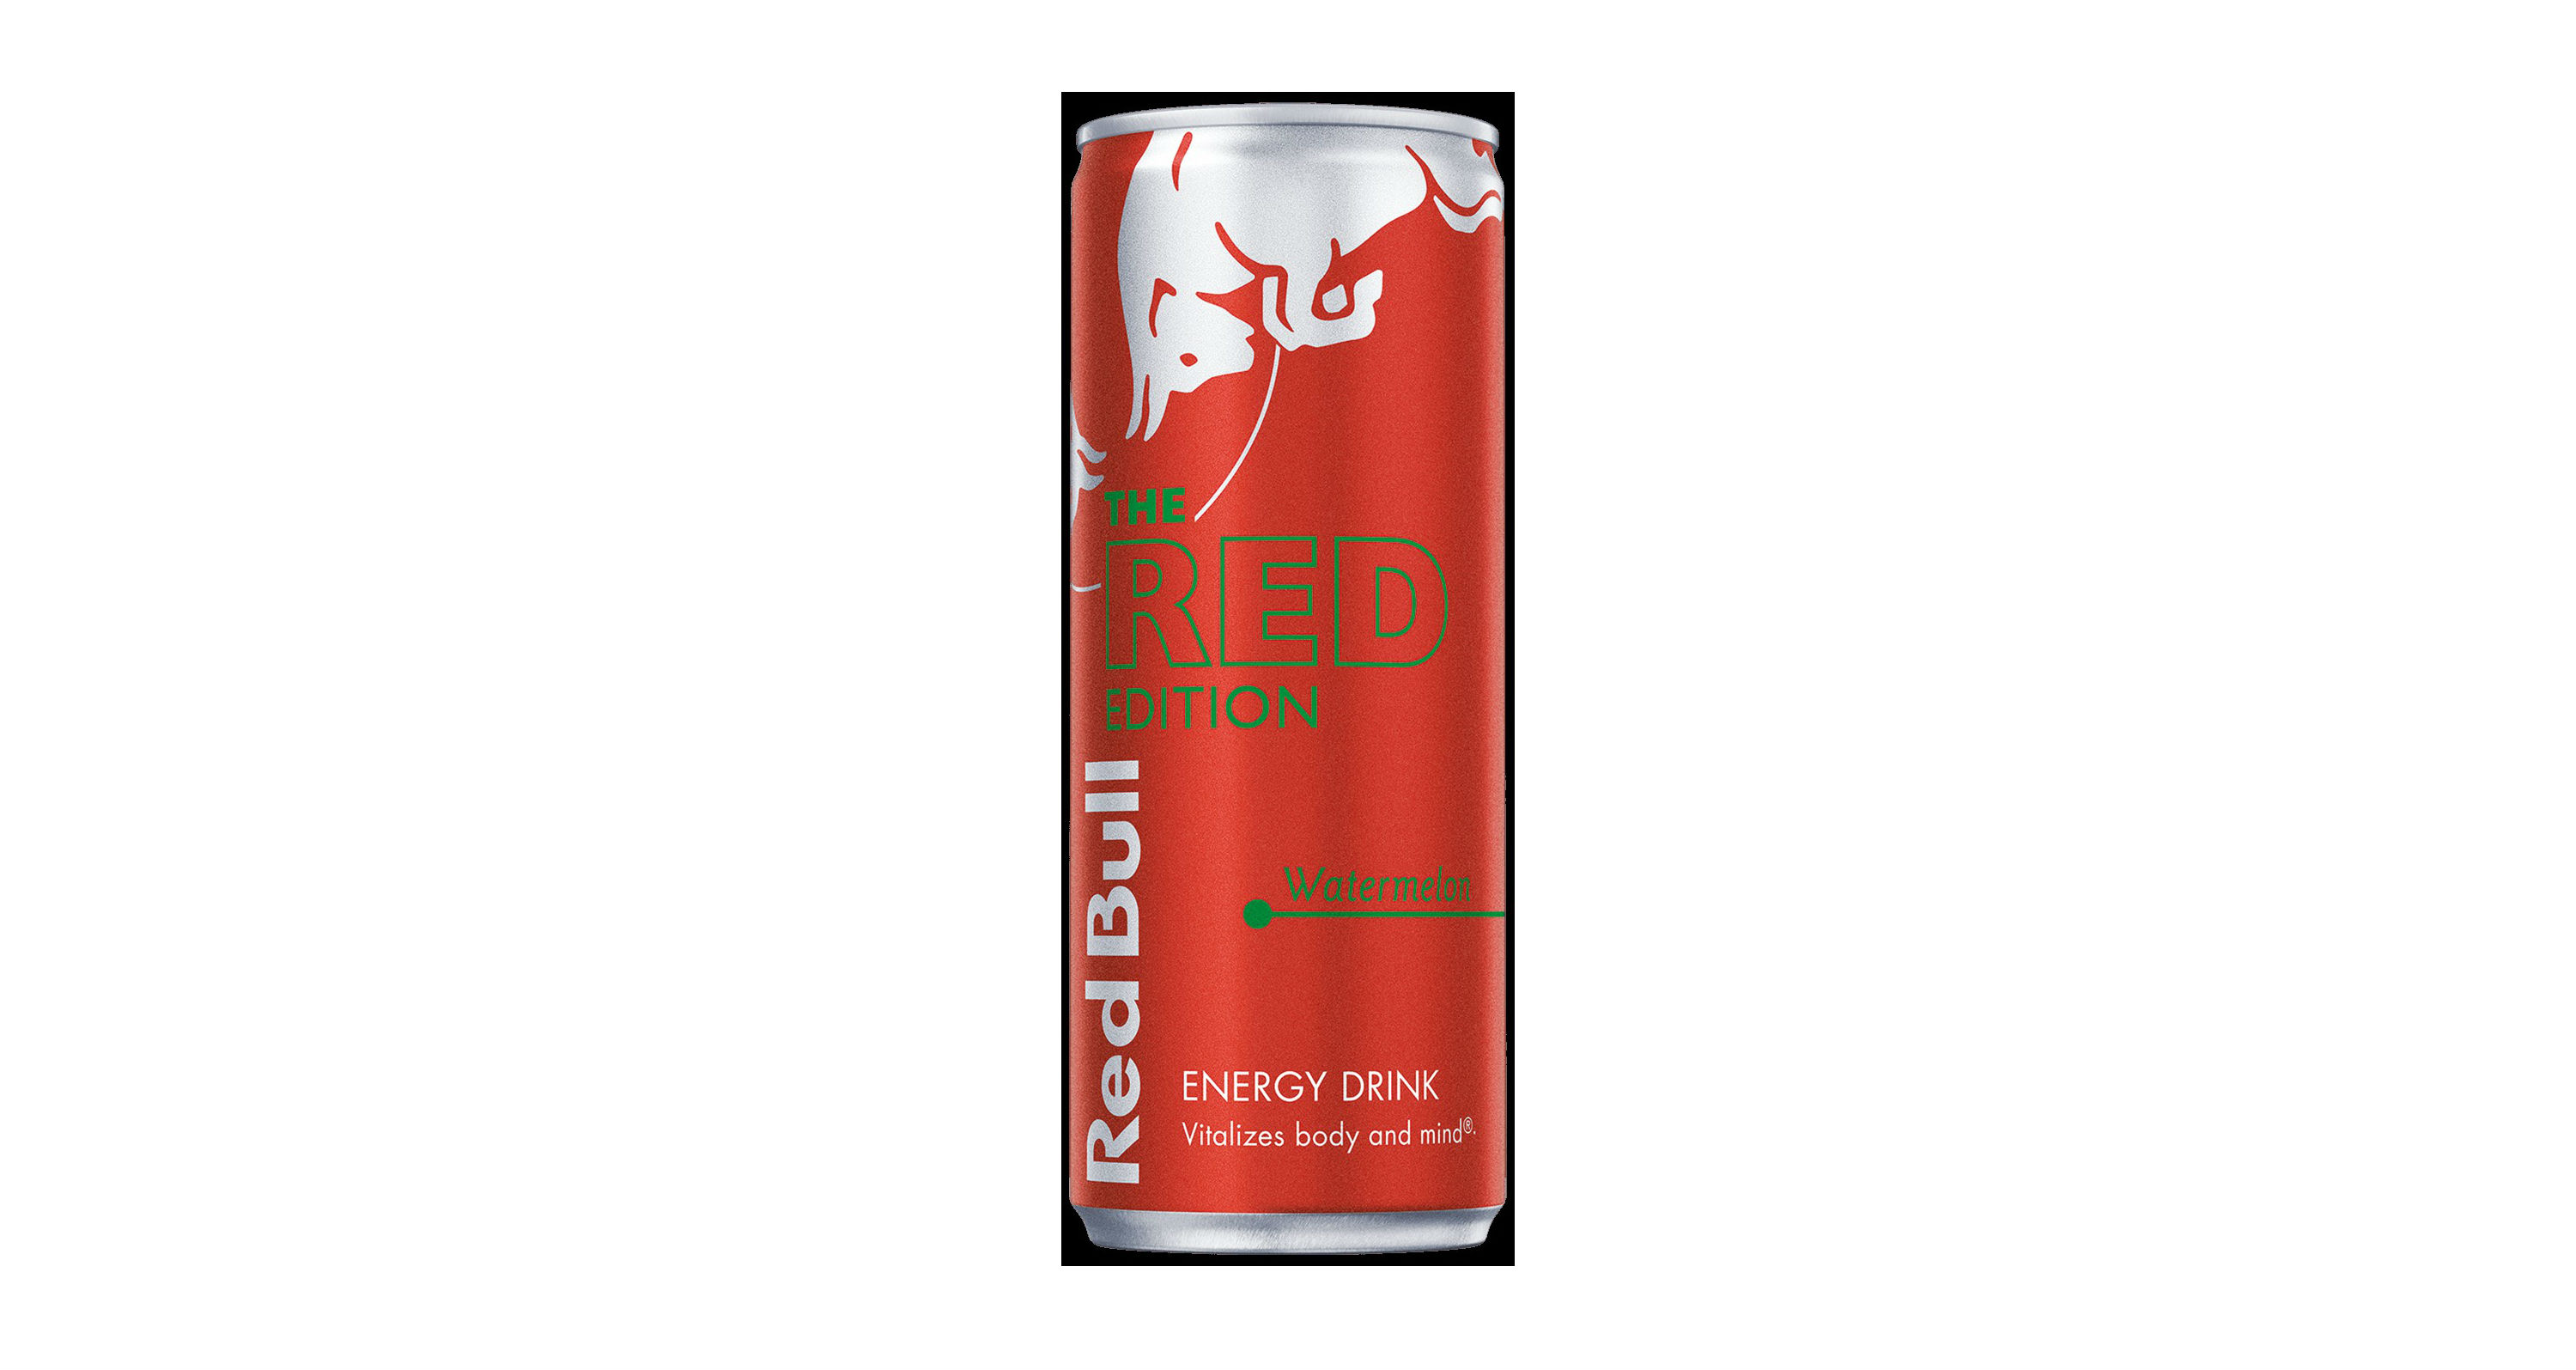 Red Bull makes Red Edition permanent member of Editions range